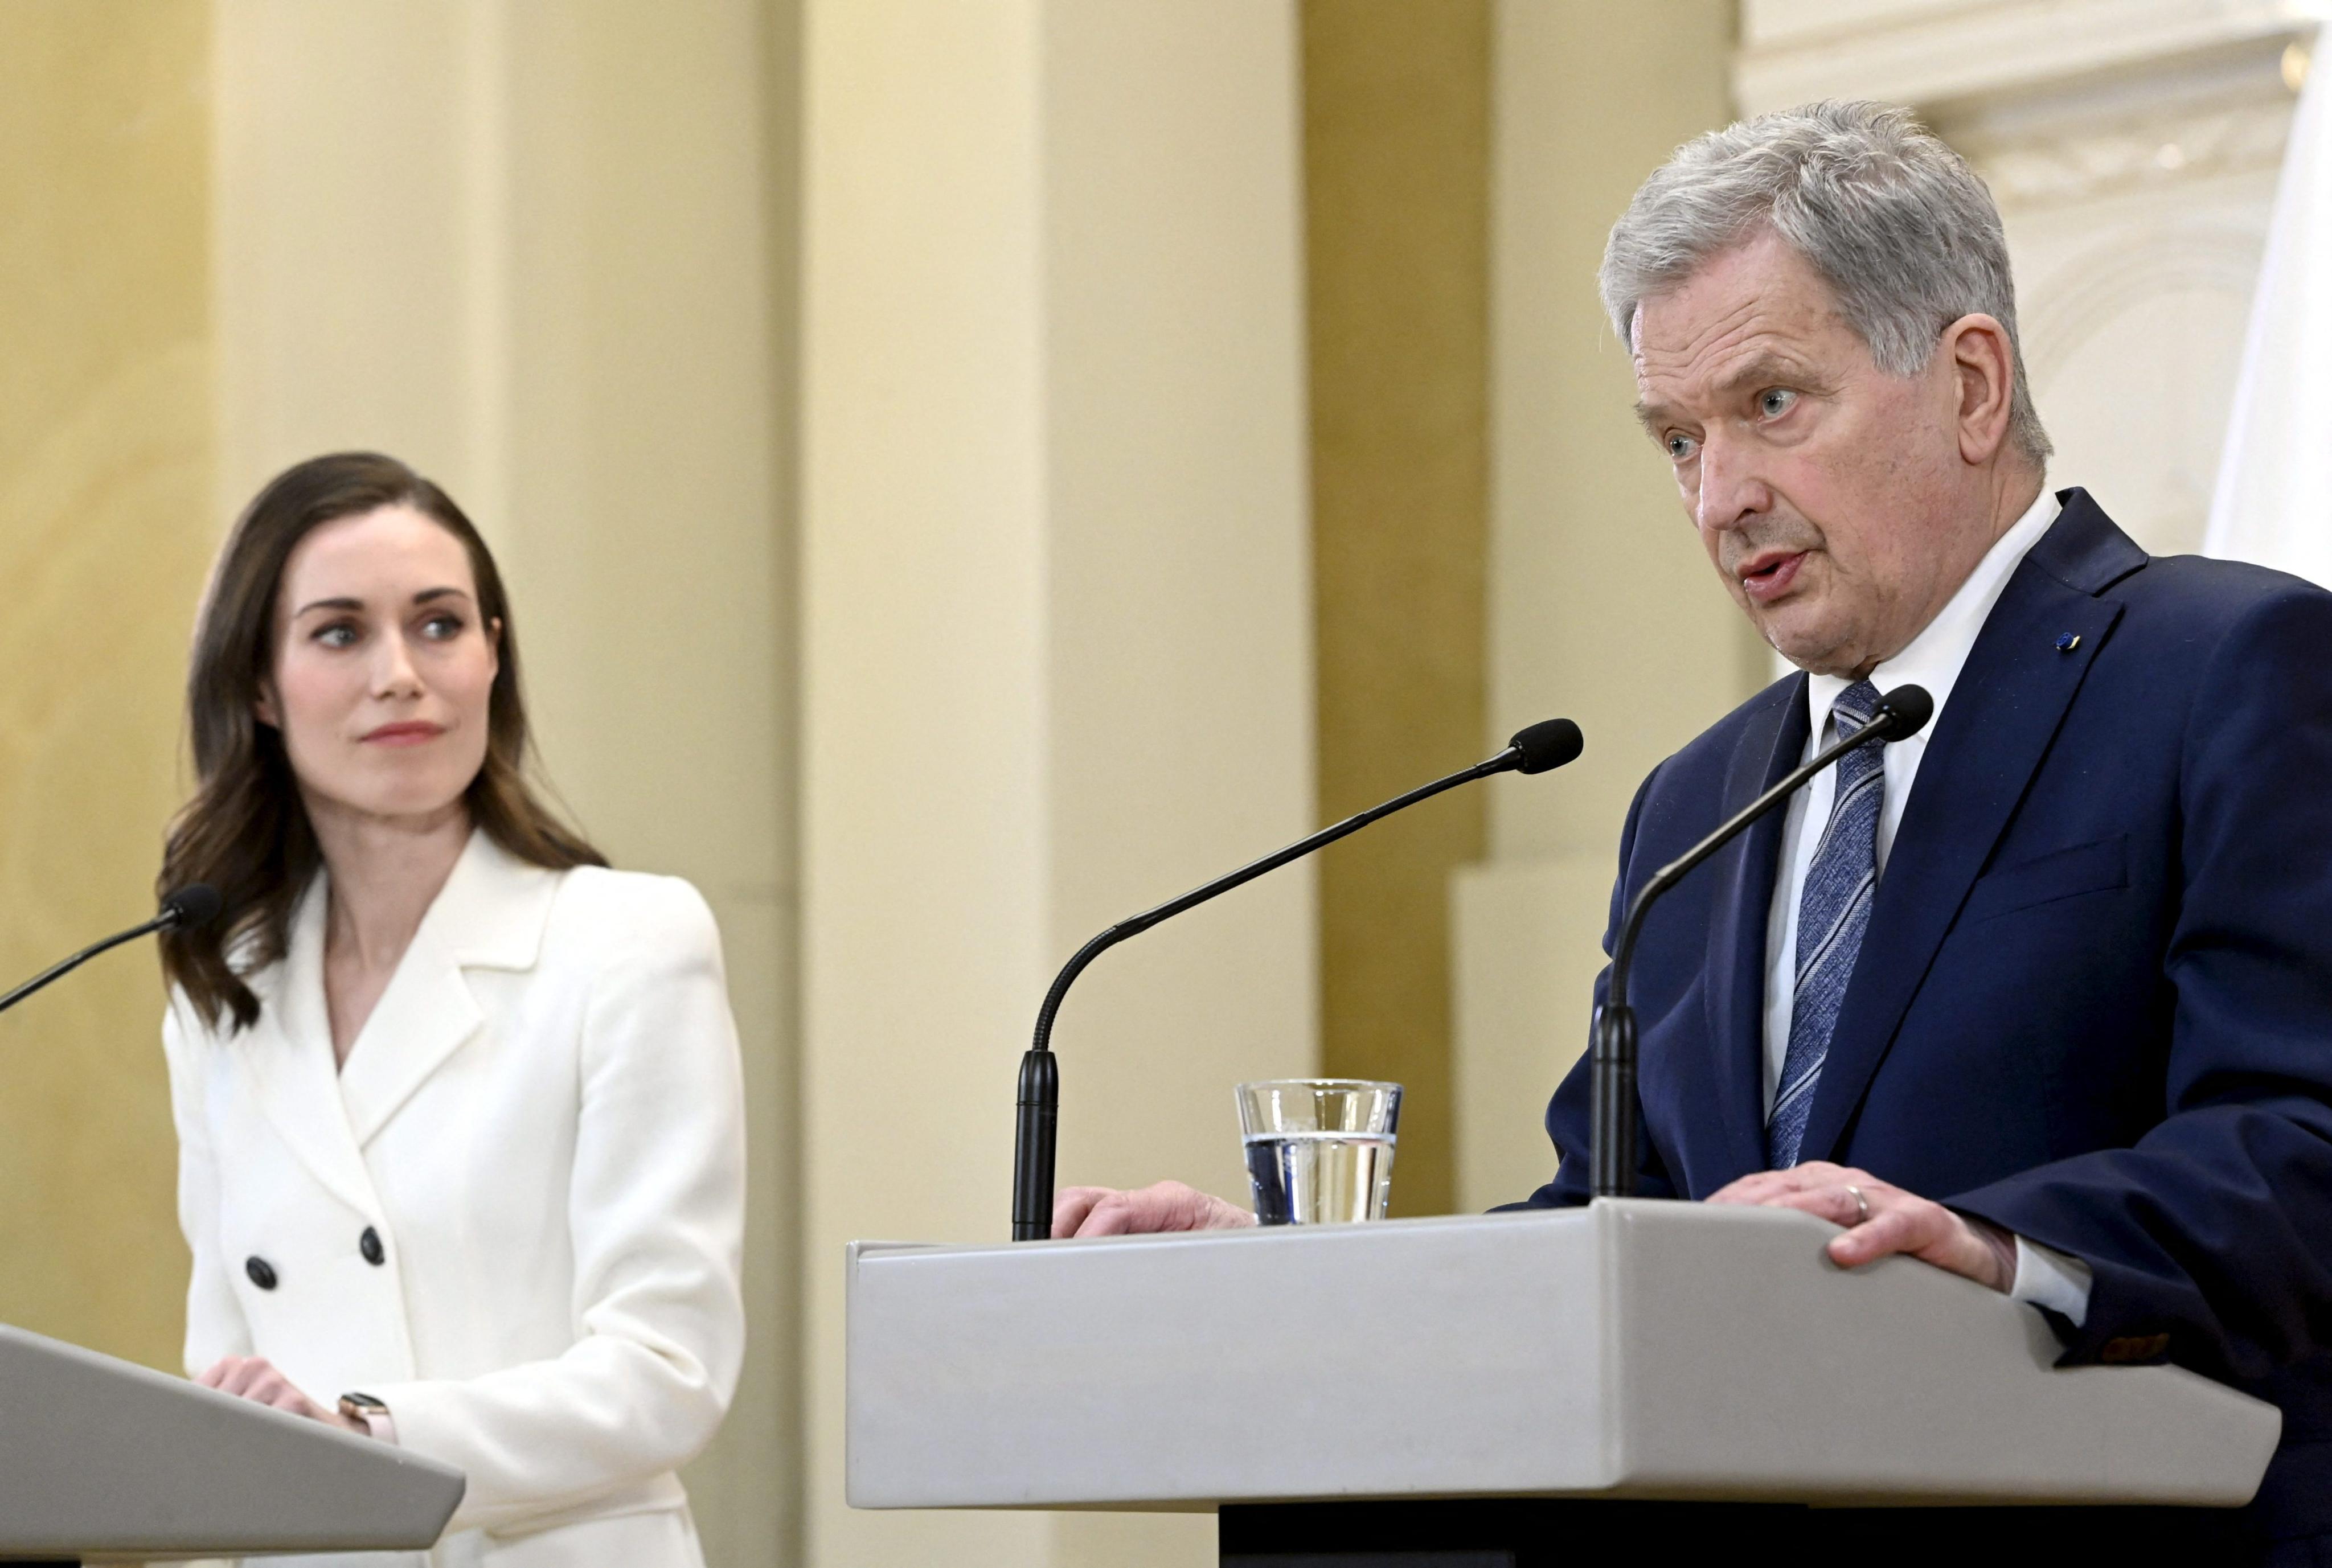 Finland’s President Sauli Niinistö, right, and Prime Minister Sanna Marin at a press conference to announce that Finland will apply for Nato membership. Photo: AFP